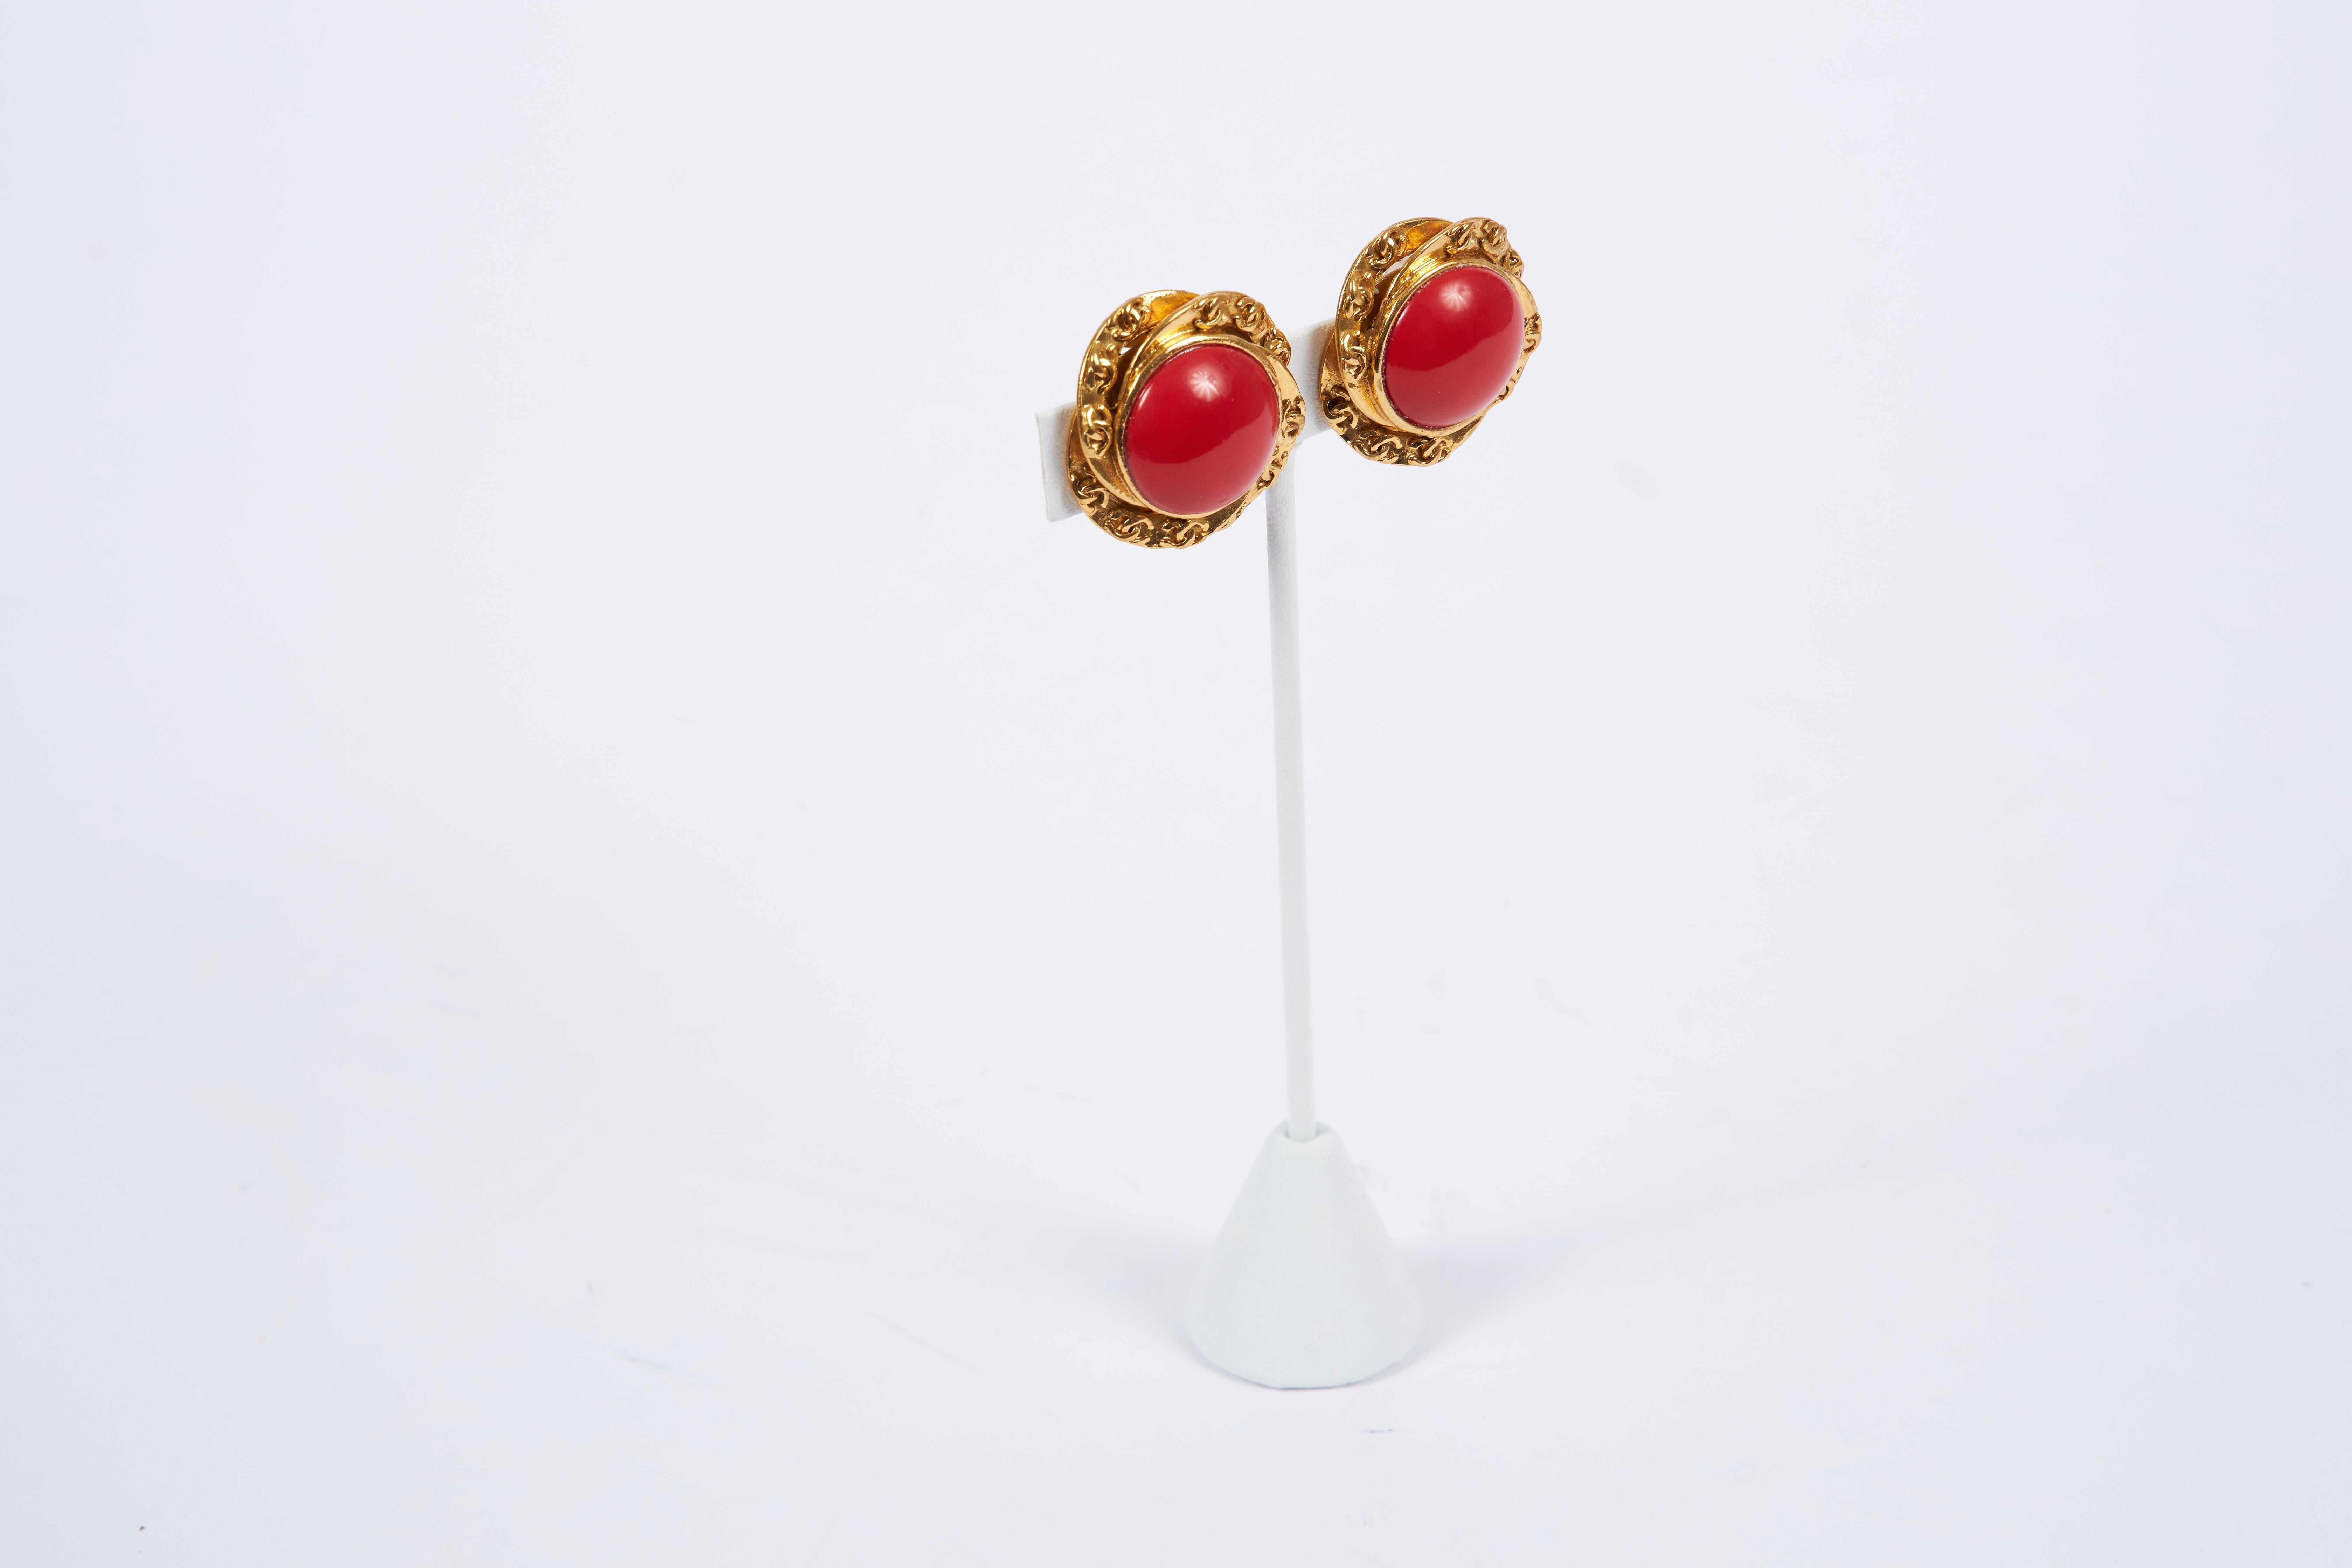 Chanel red poured glass, gripoix, and gold cc metal clip on earrings. Autumn 93 collection, come with original box.
